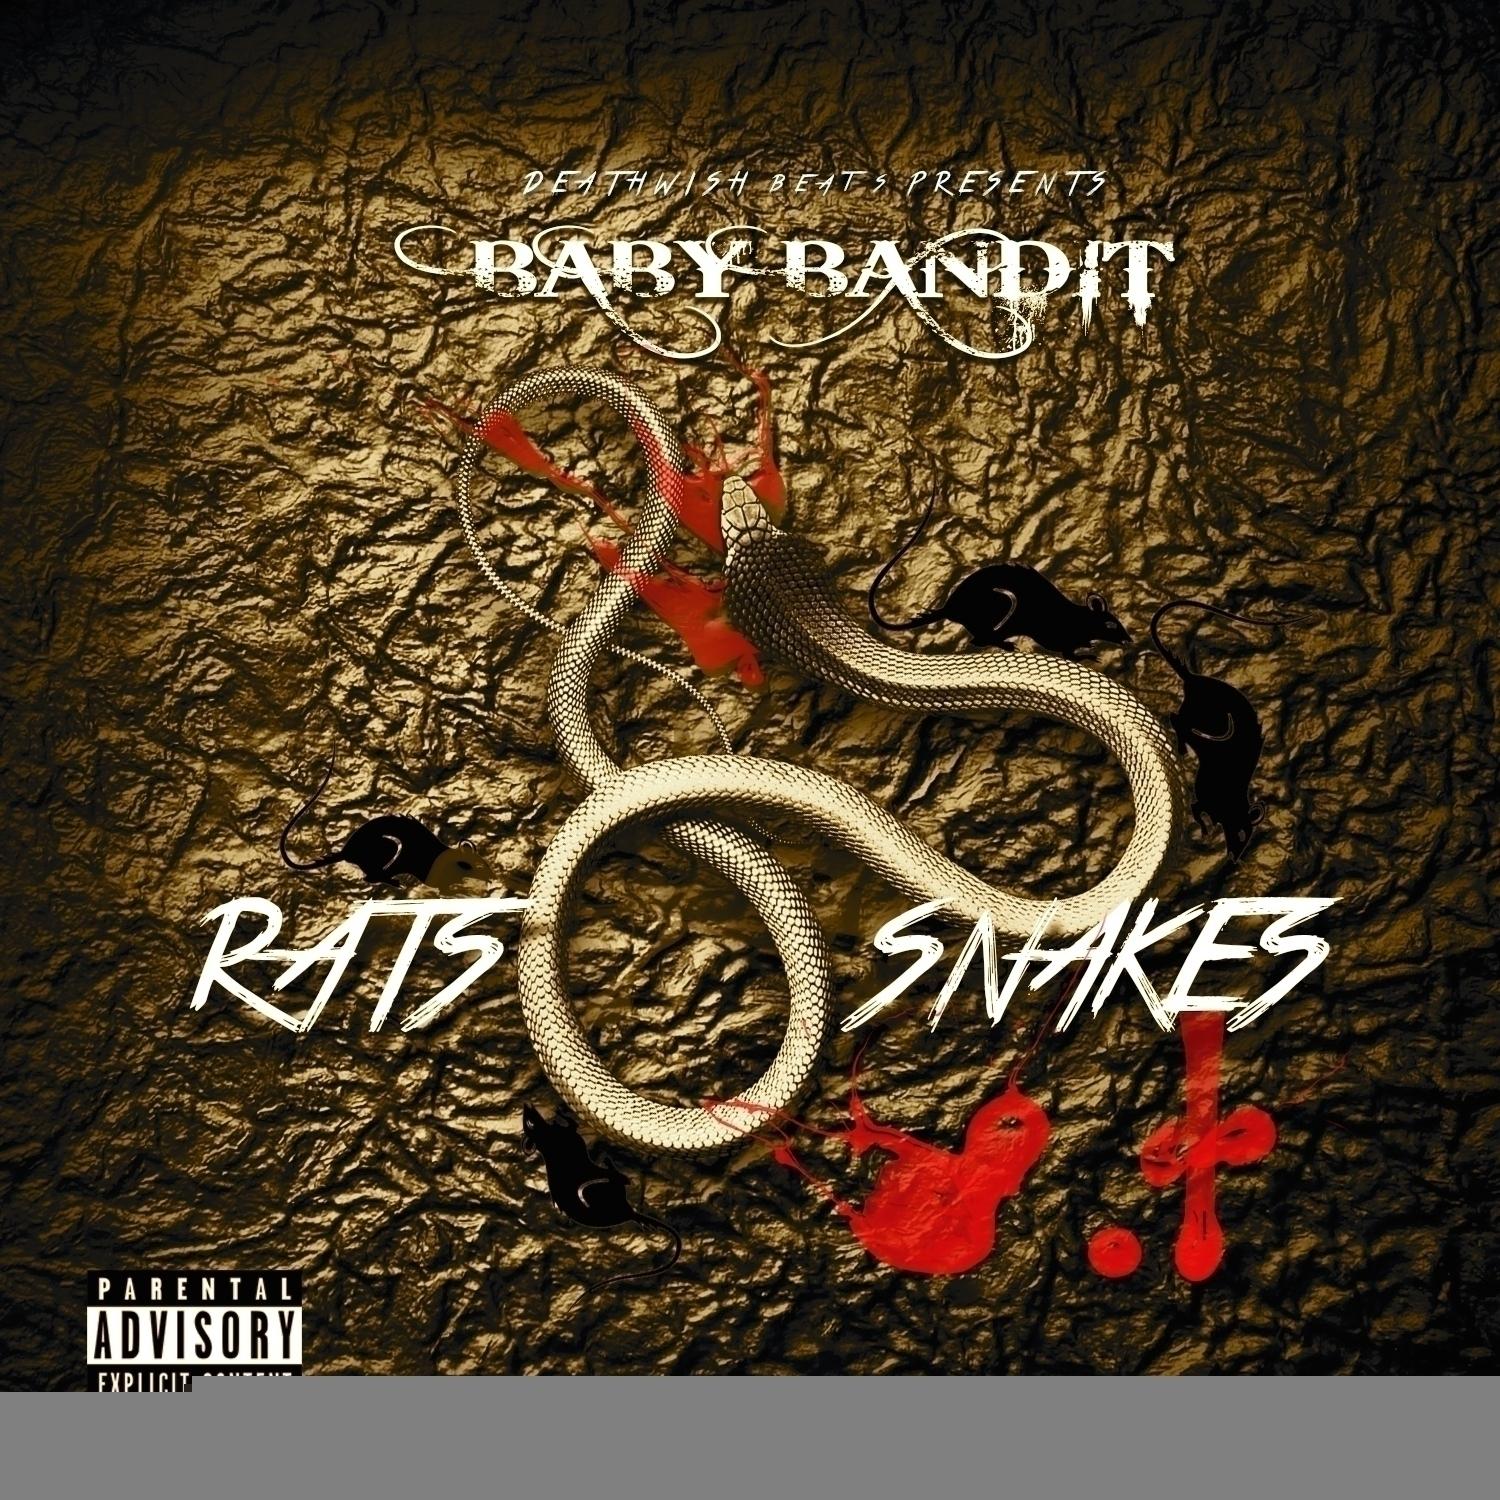 Rats and Snakes